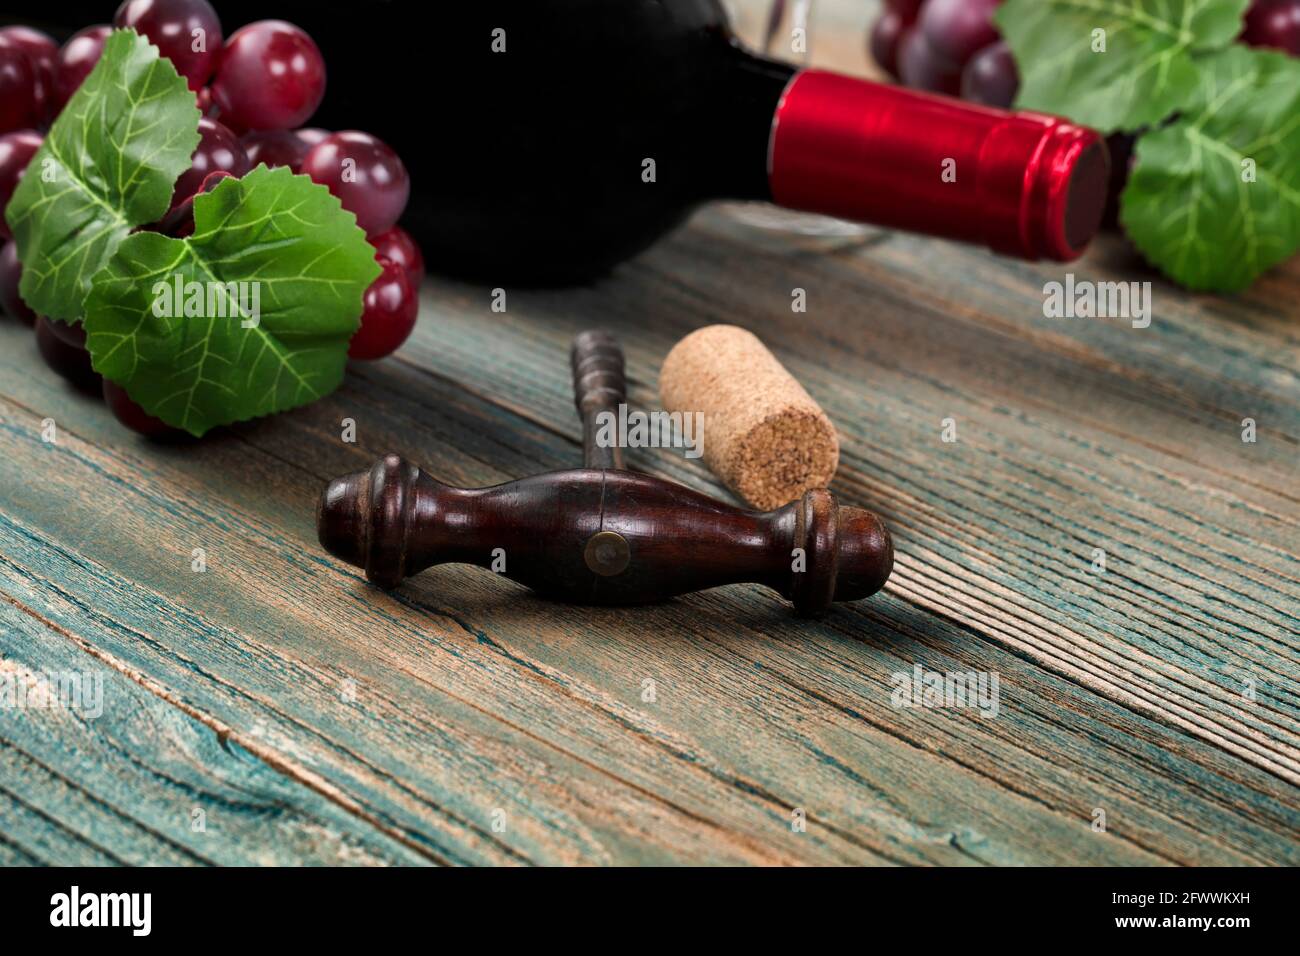 Select focus of vintage corkscrew with grapes and wine bottle in background on blue rustic wood planks Stock Photo